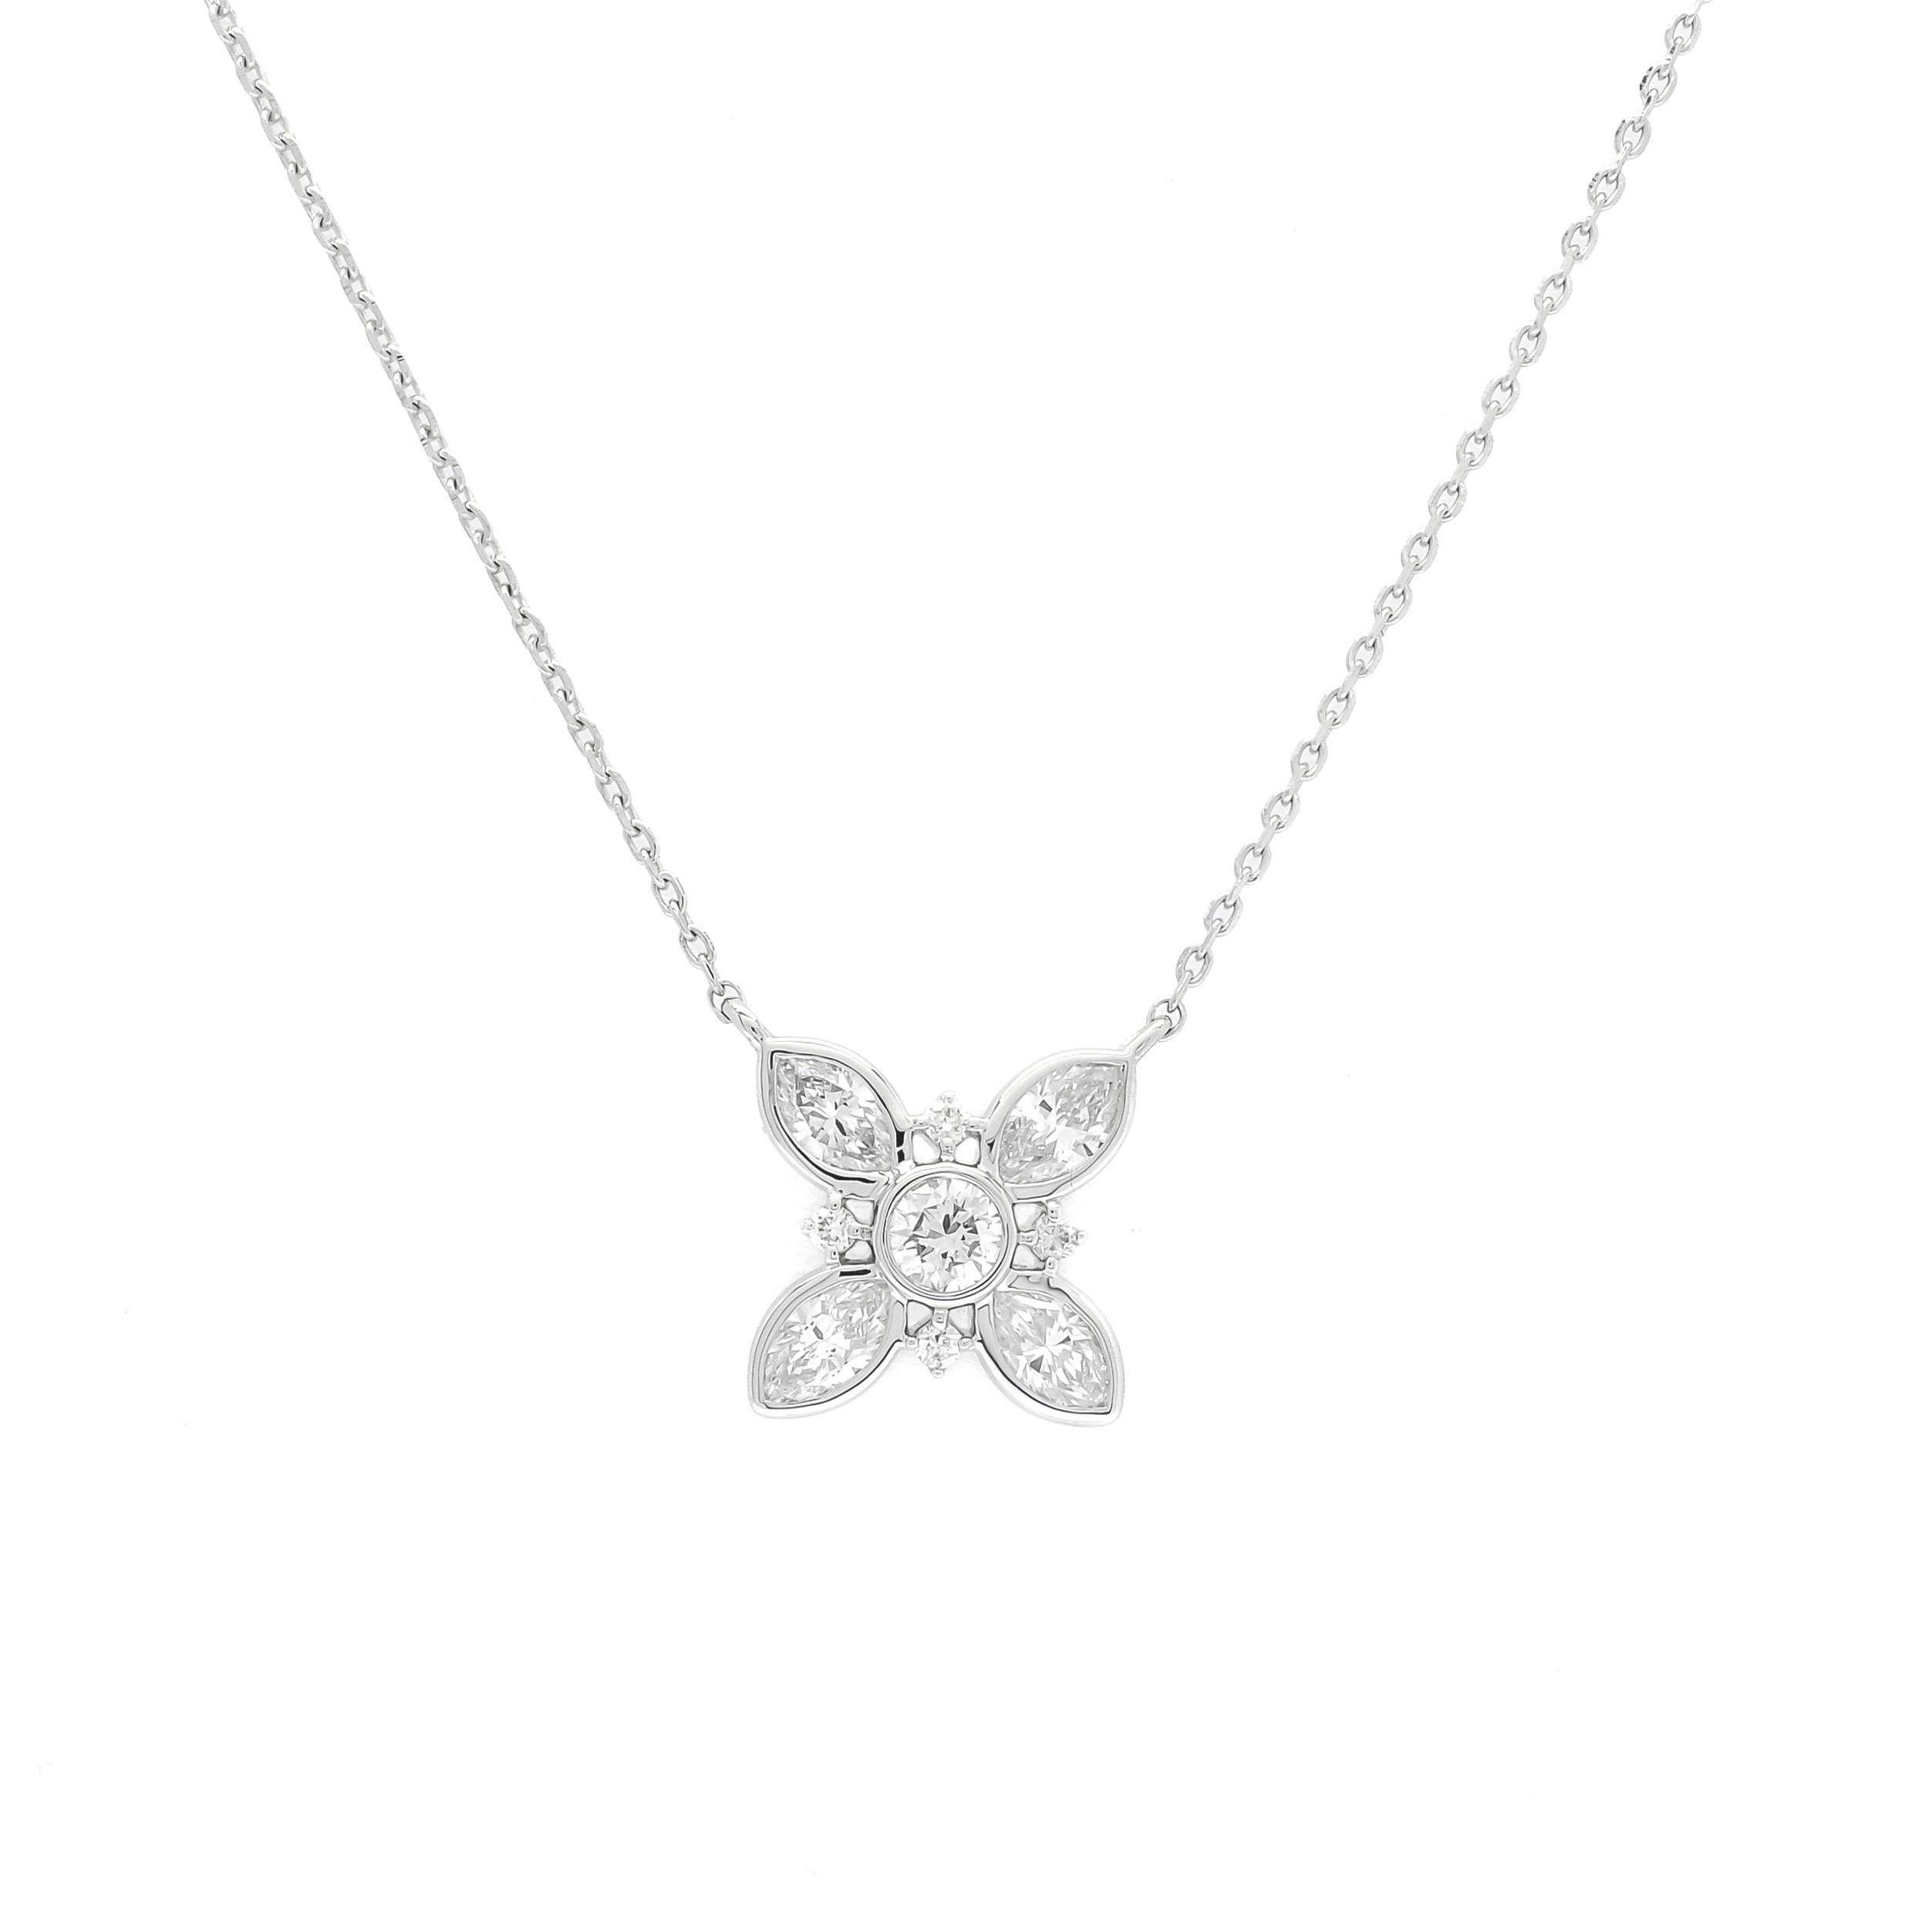 Natural Diamond 0.65 carats 18KT White Gold Flower Pendant Chain Necklace   In New Condition For Sale In Antwerpen, BE